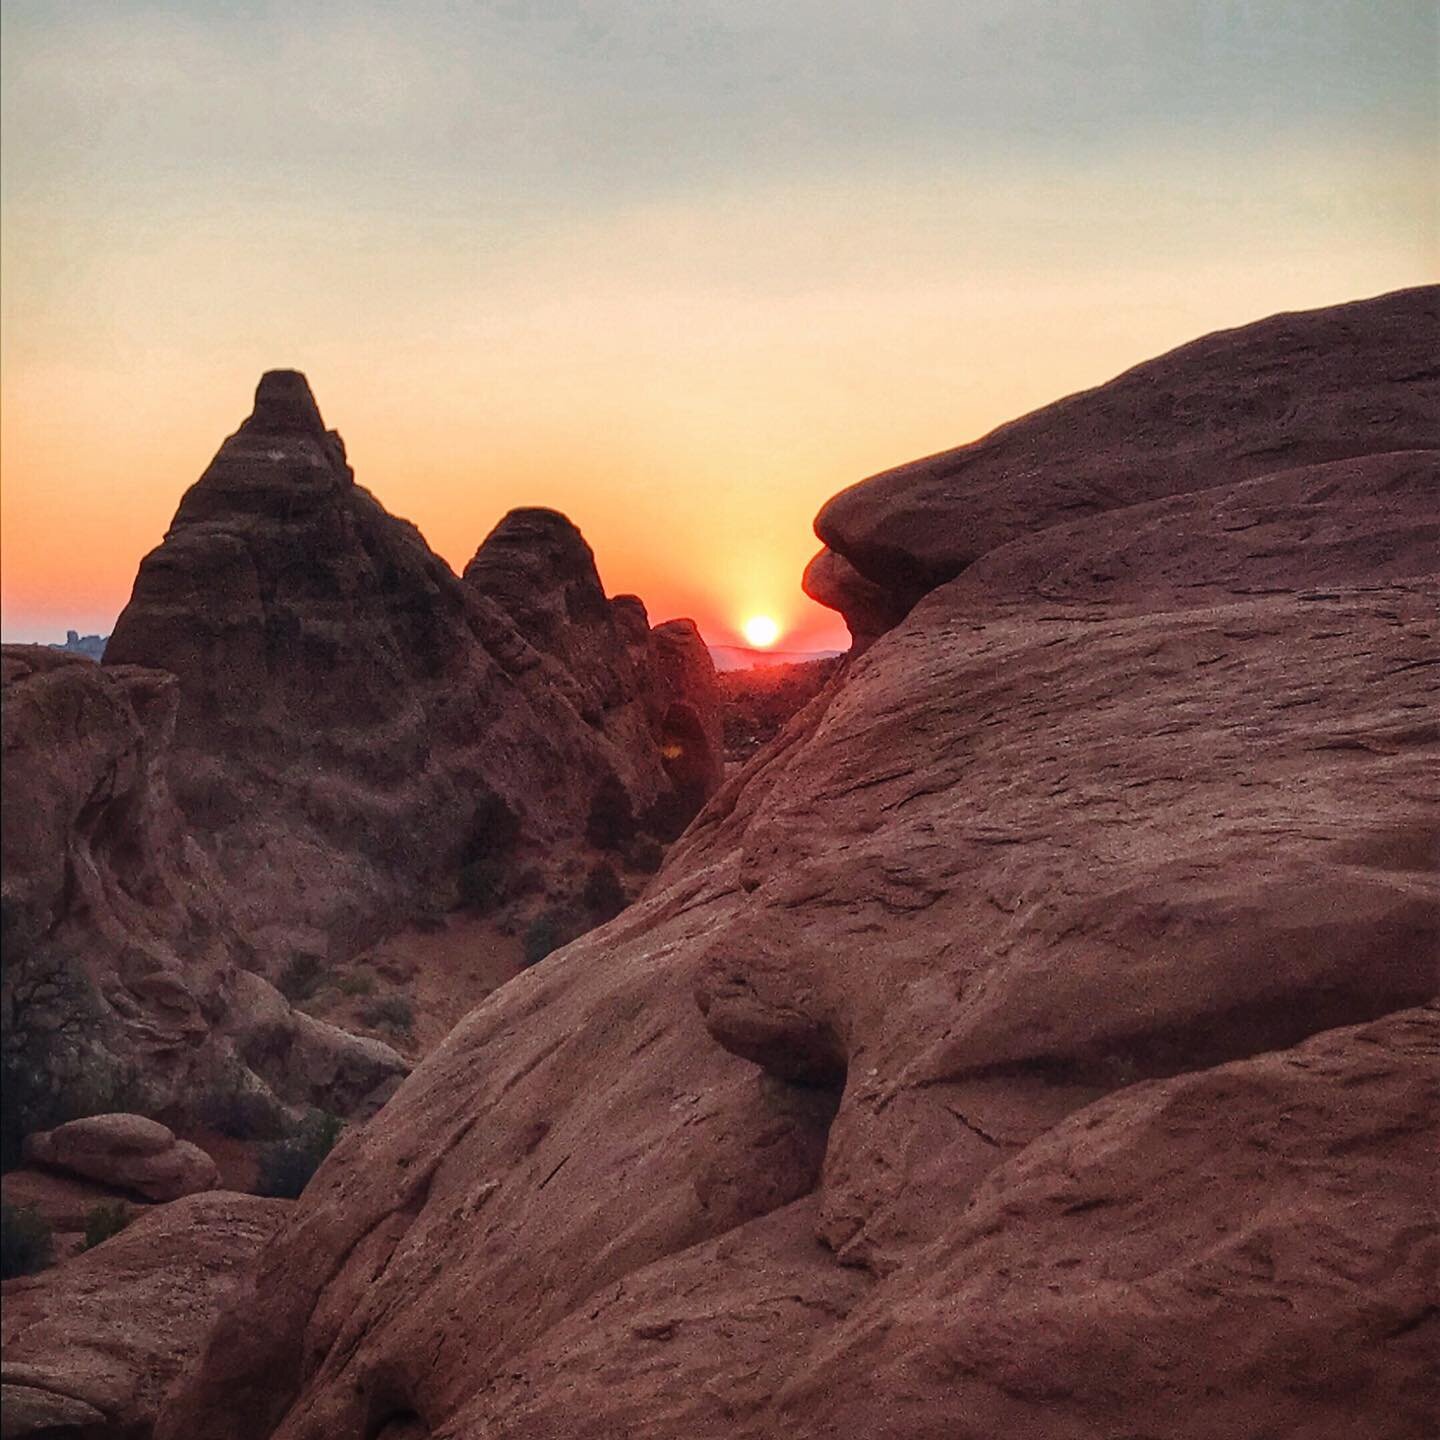 Be. Still. My. Soul. 

This was one of our Utah sunsets.